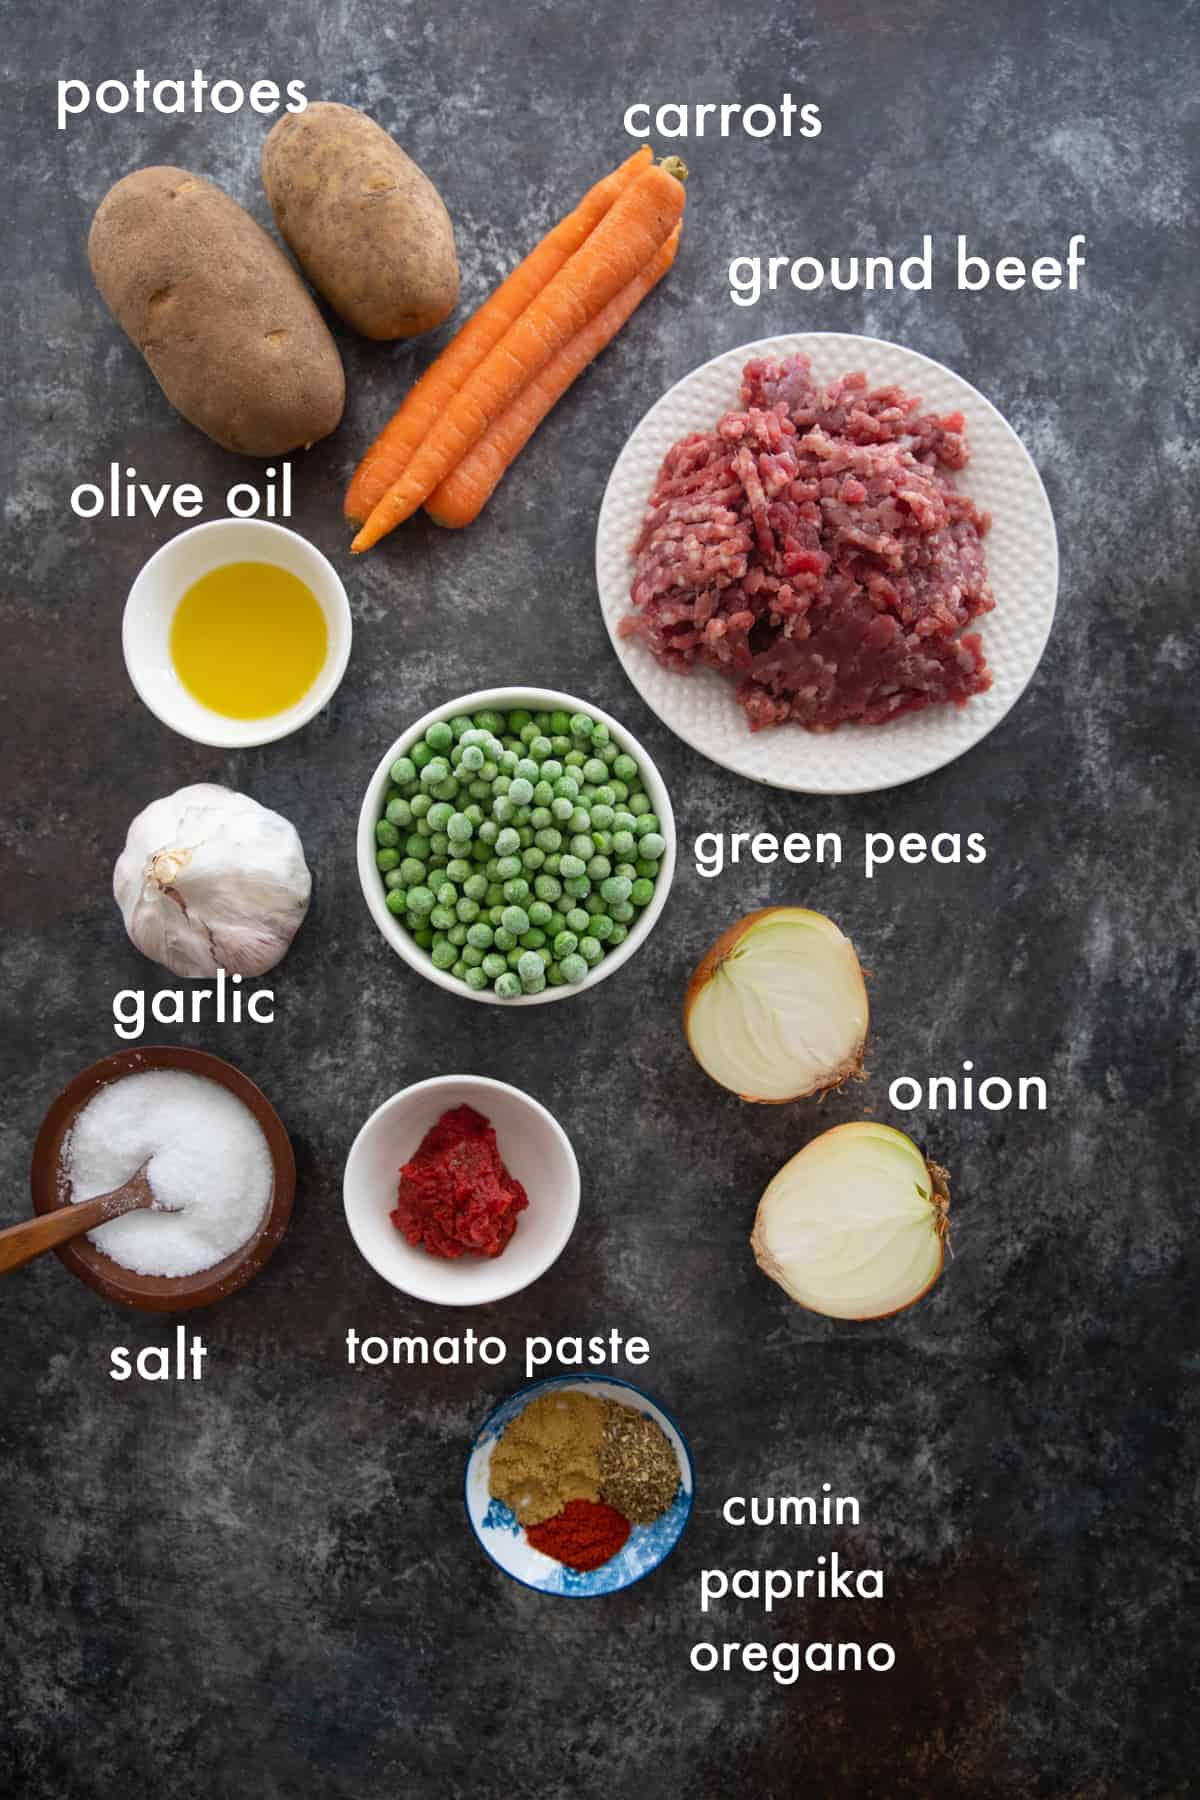 to make ground beef stew you need olive oil, onion, garlic, ground beef, potatoes, carots, tomato paste and spices. 